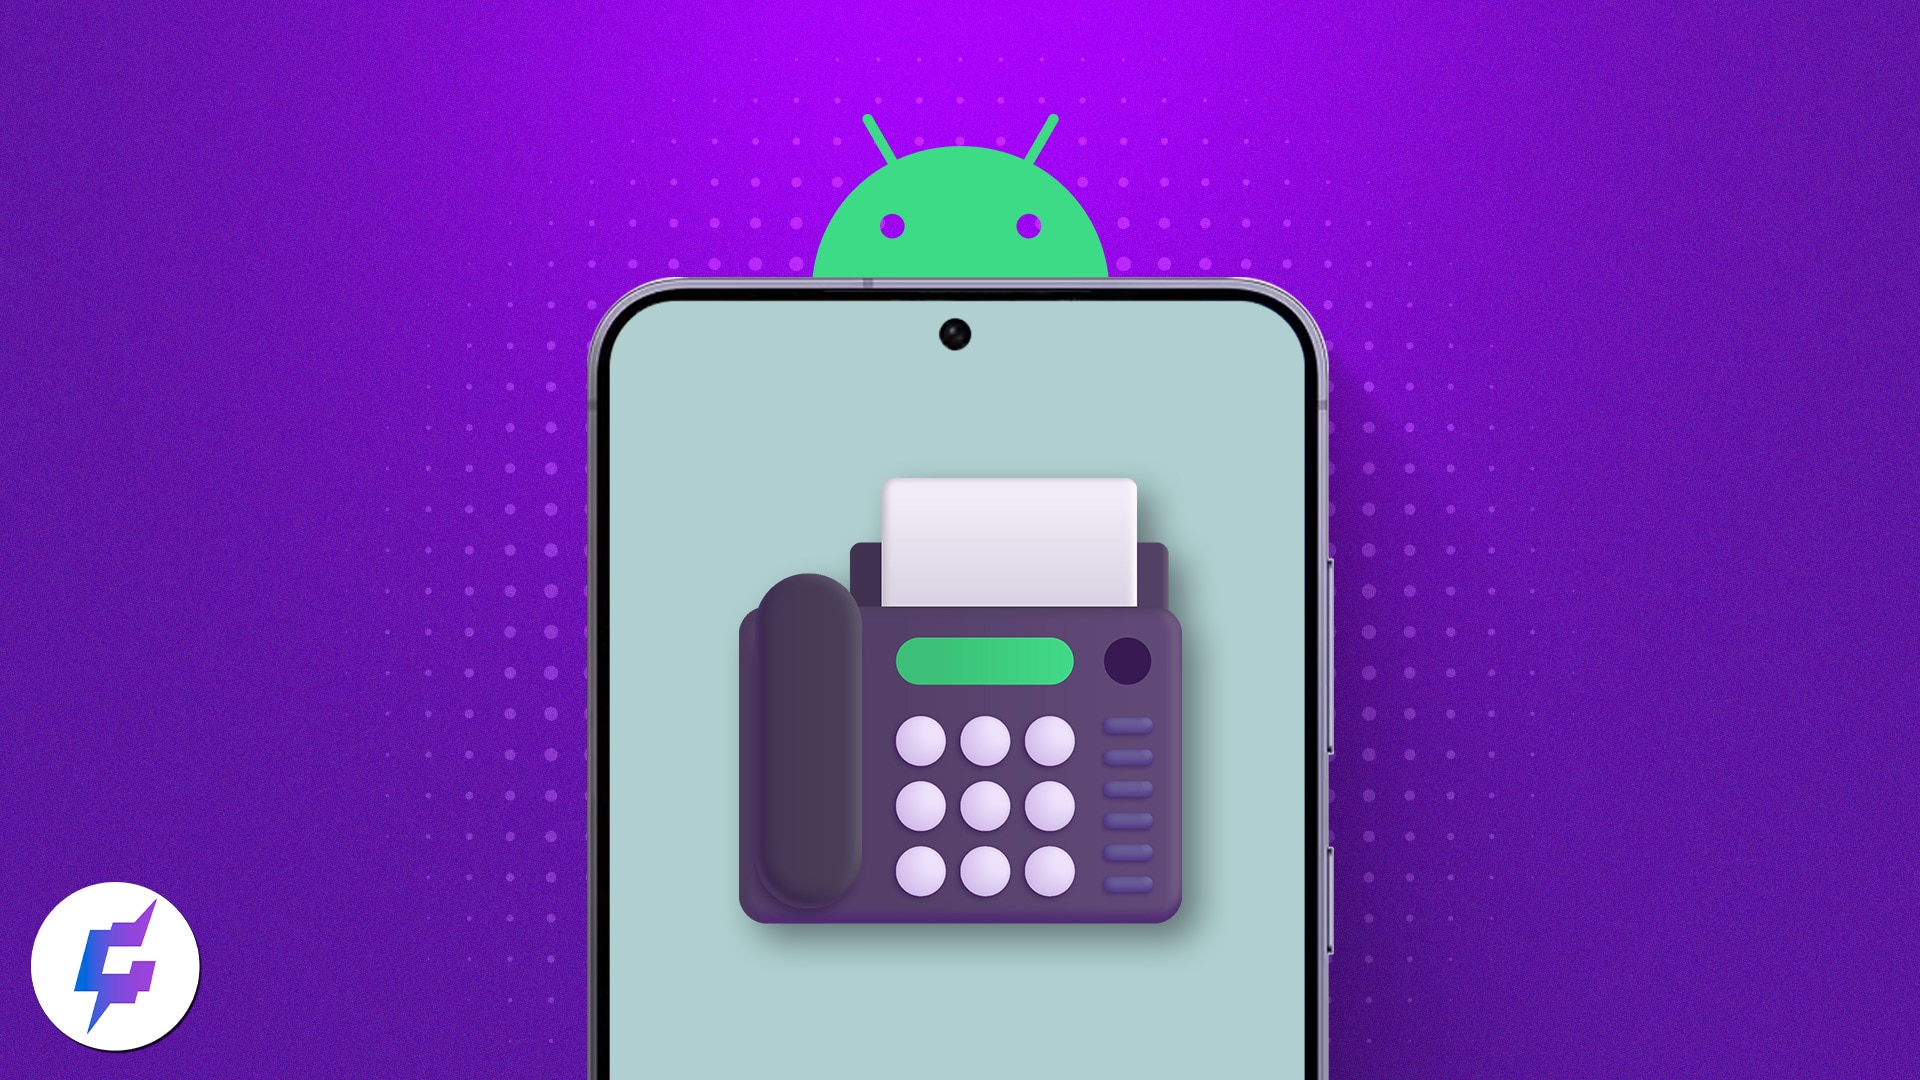 How to send fax from Android